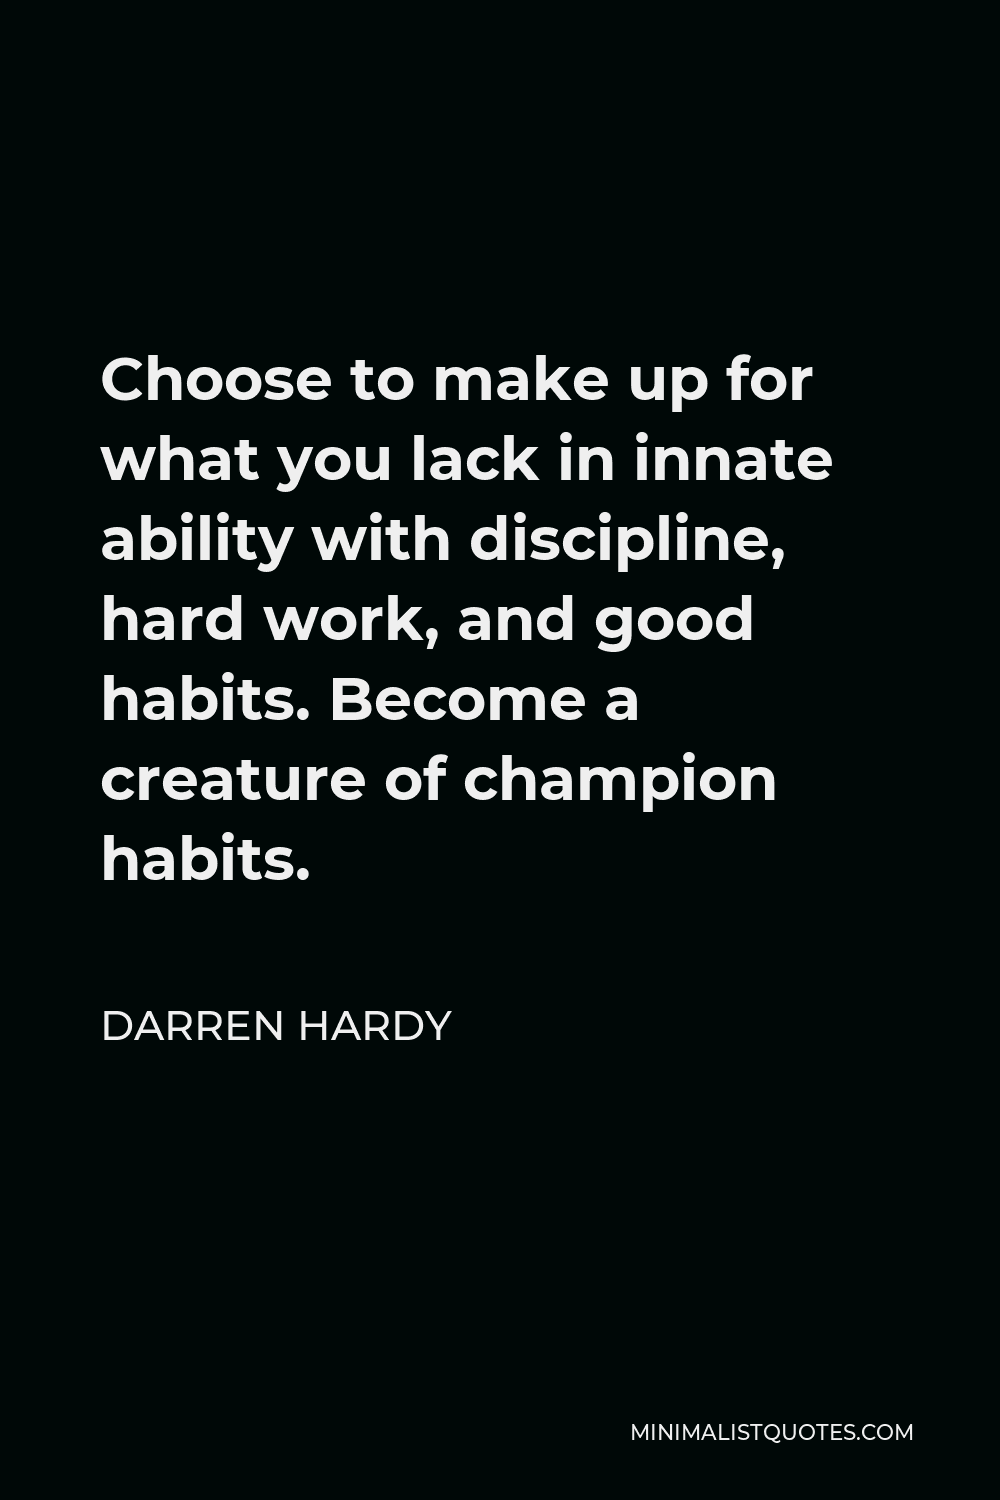 Darren Hardy Quote - Choose to make up for what you lack in innate ability with discipline, hard work, and good habits. Become a creature of champion habits.